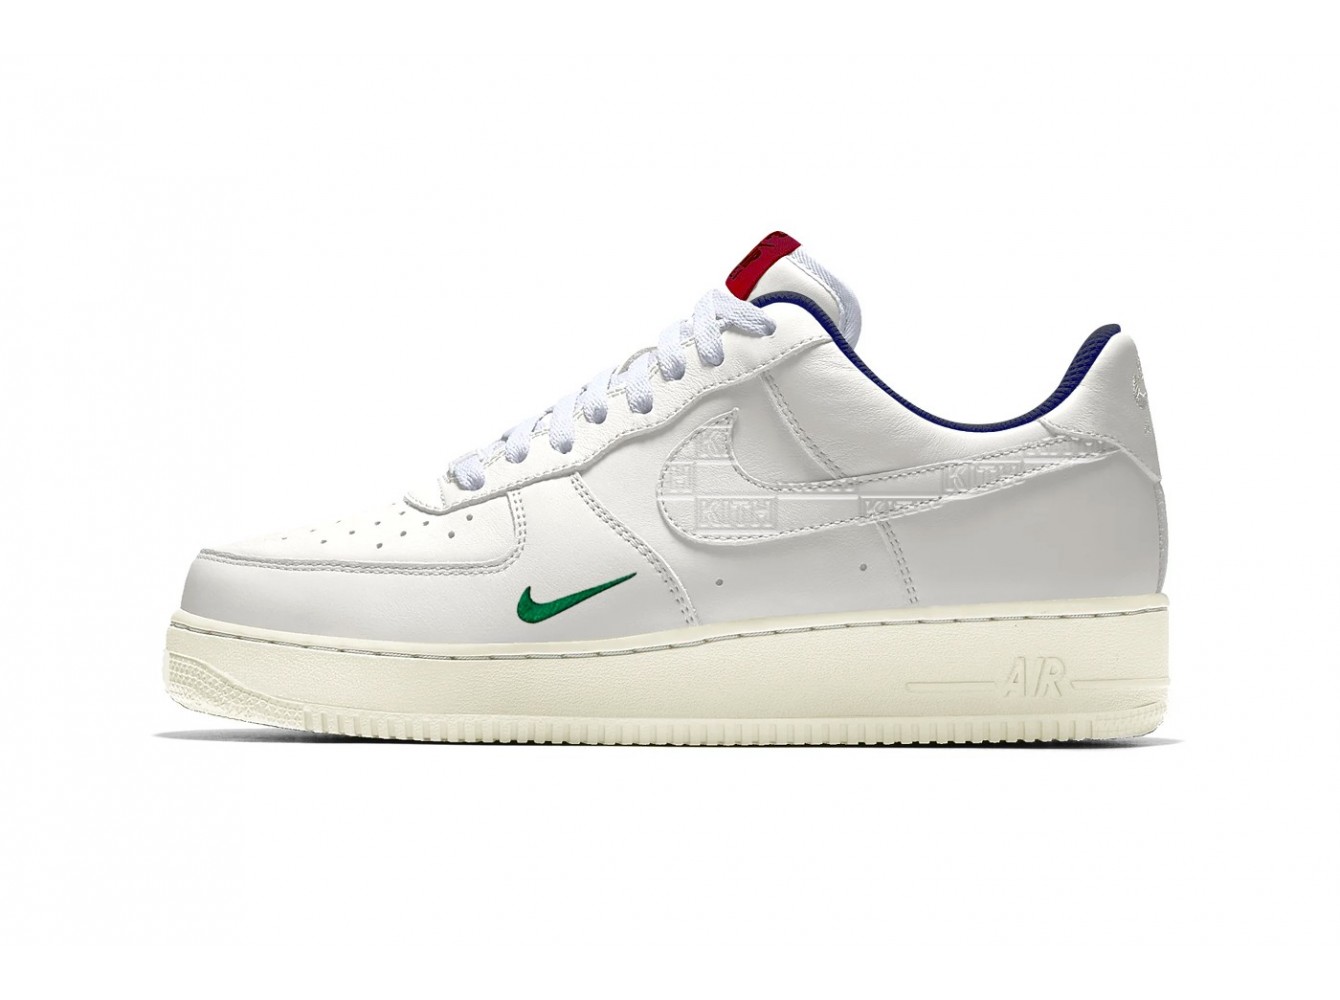 the nike air force 1 low